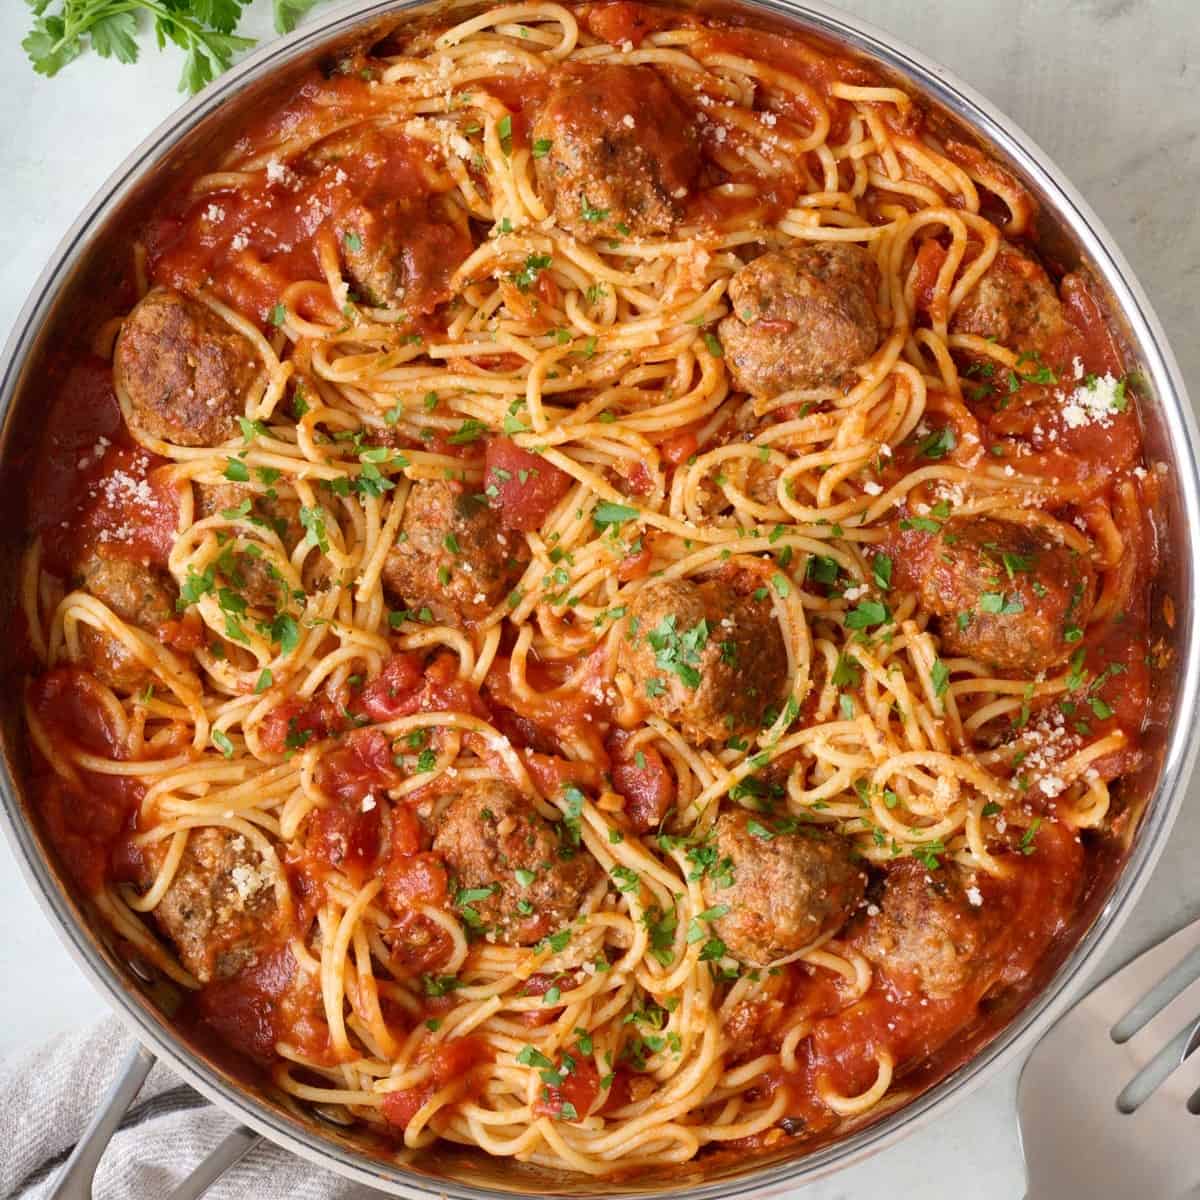 Spaghetti and meatballs after tossing together in skillet.